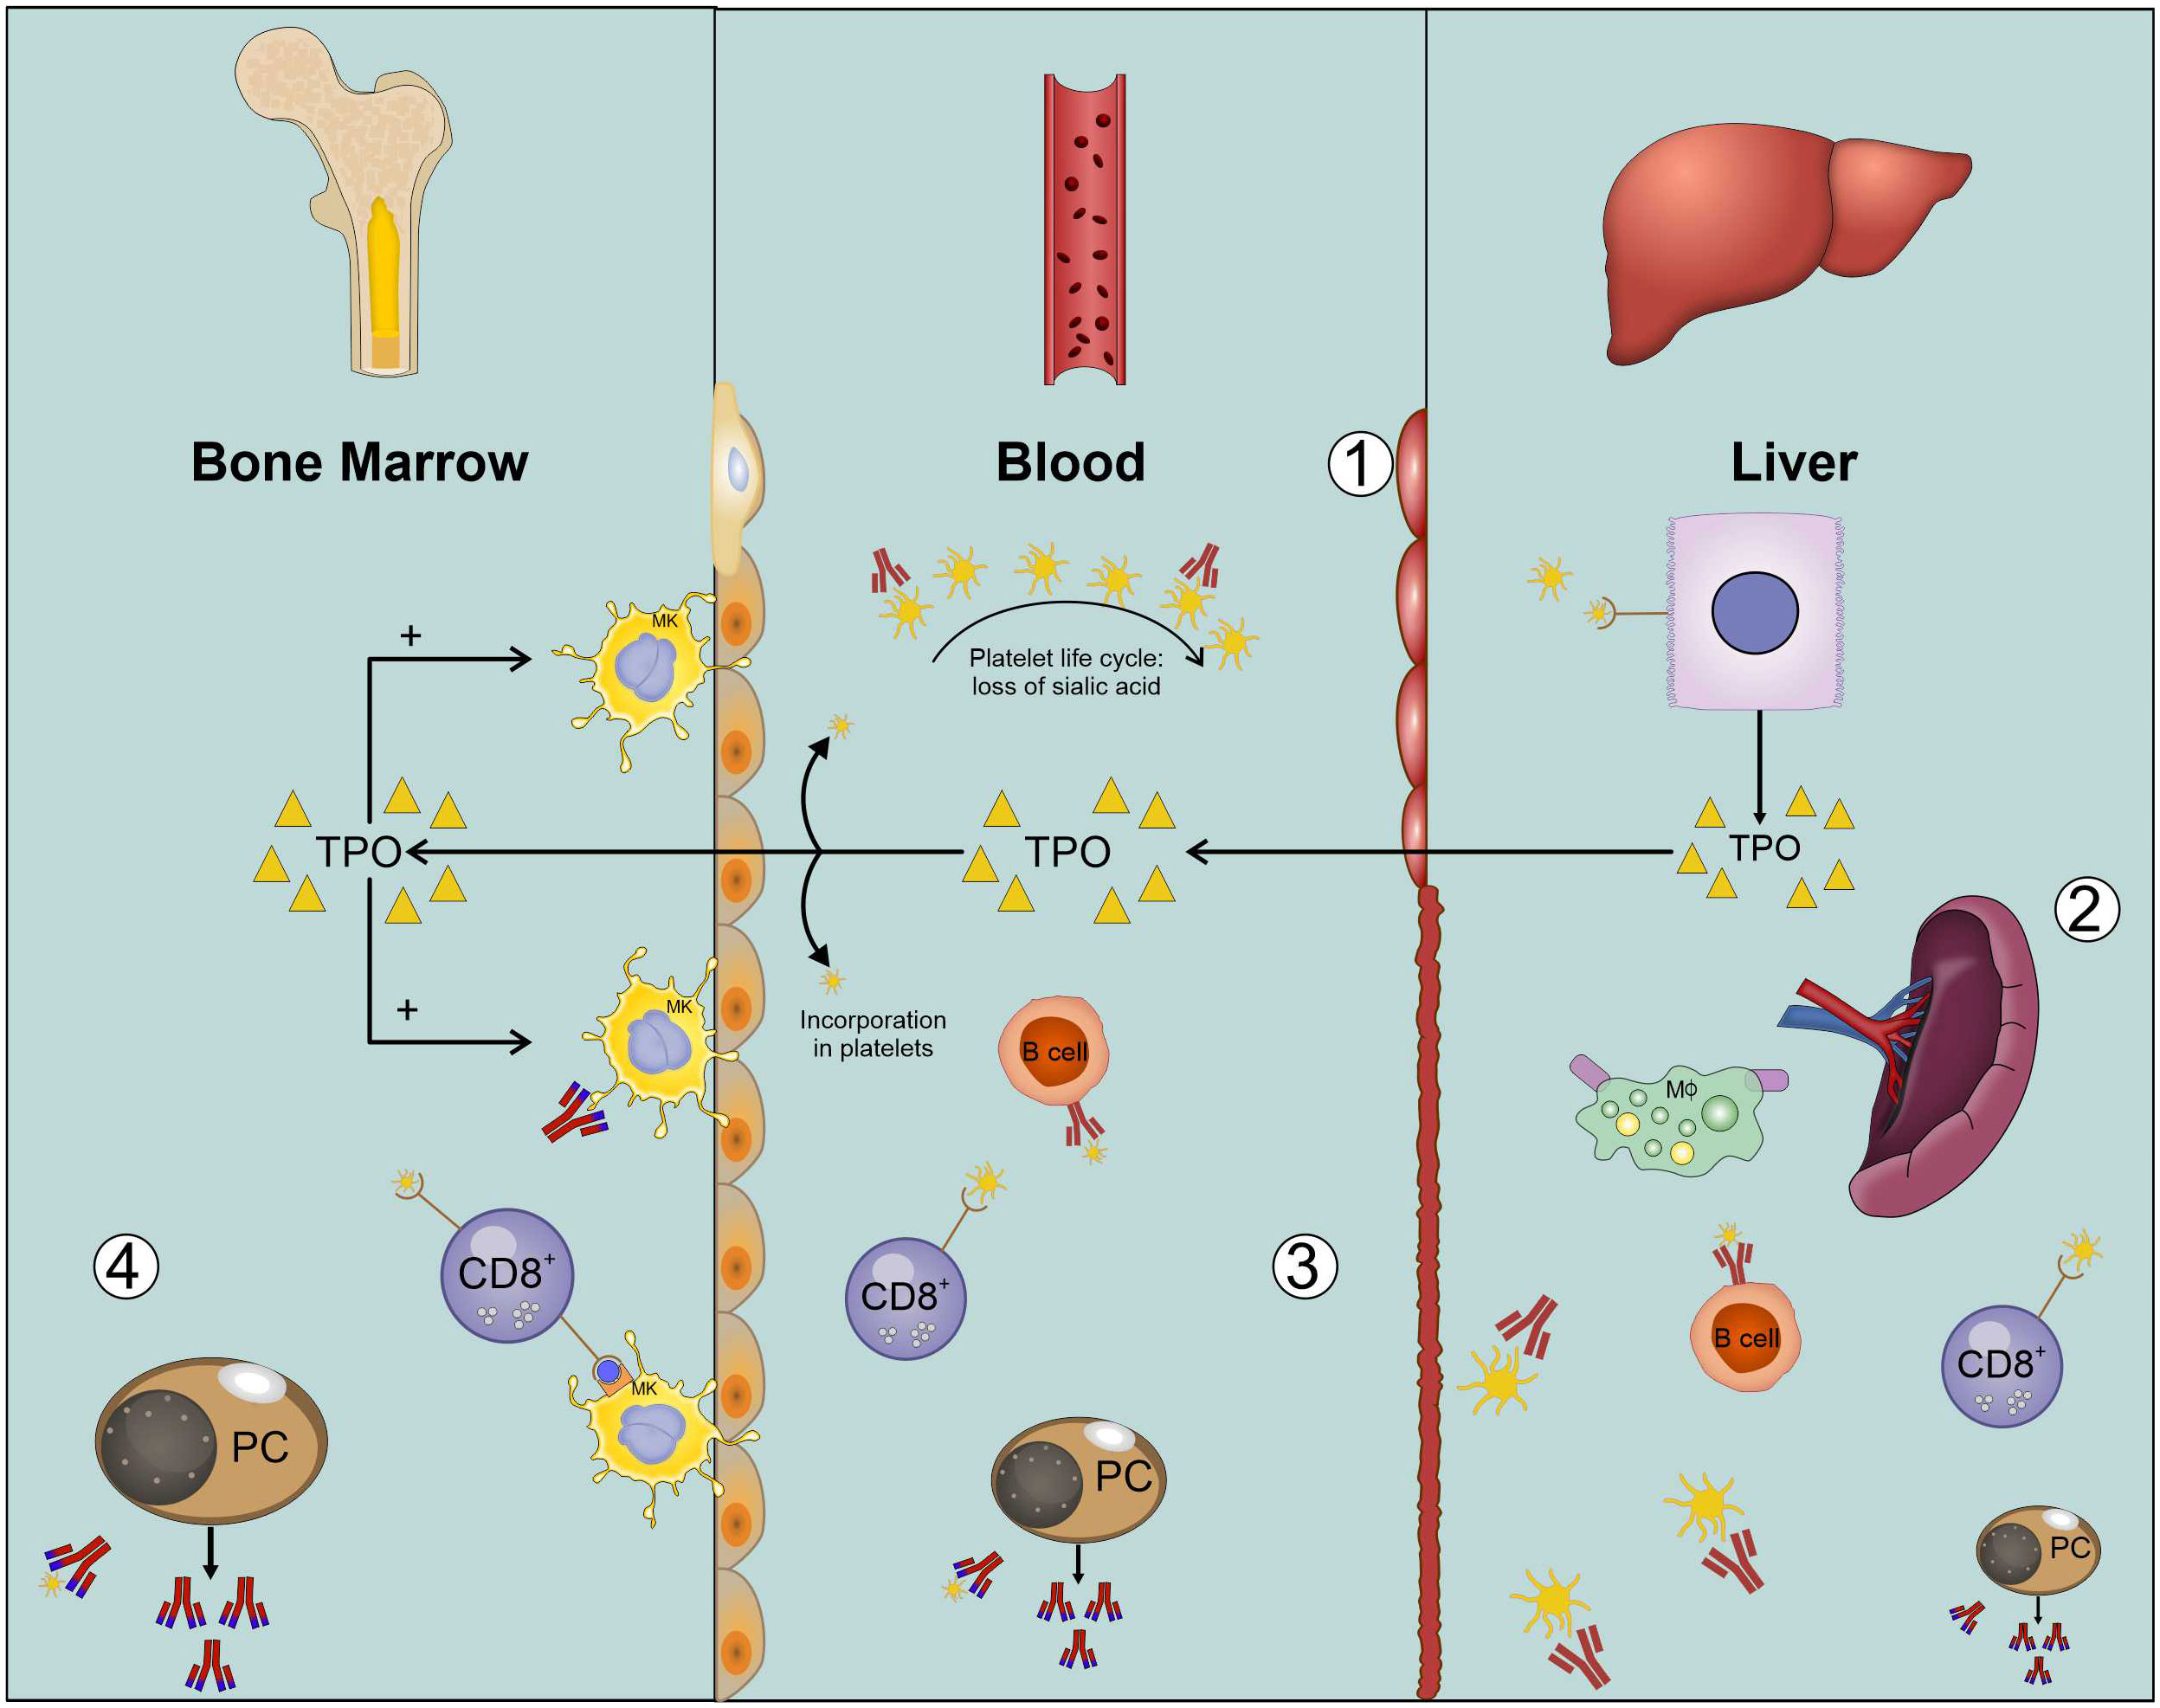 Characterization and immune regulation role of an immobilization